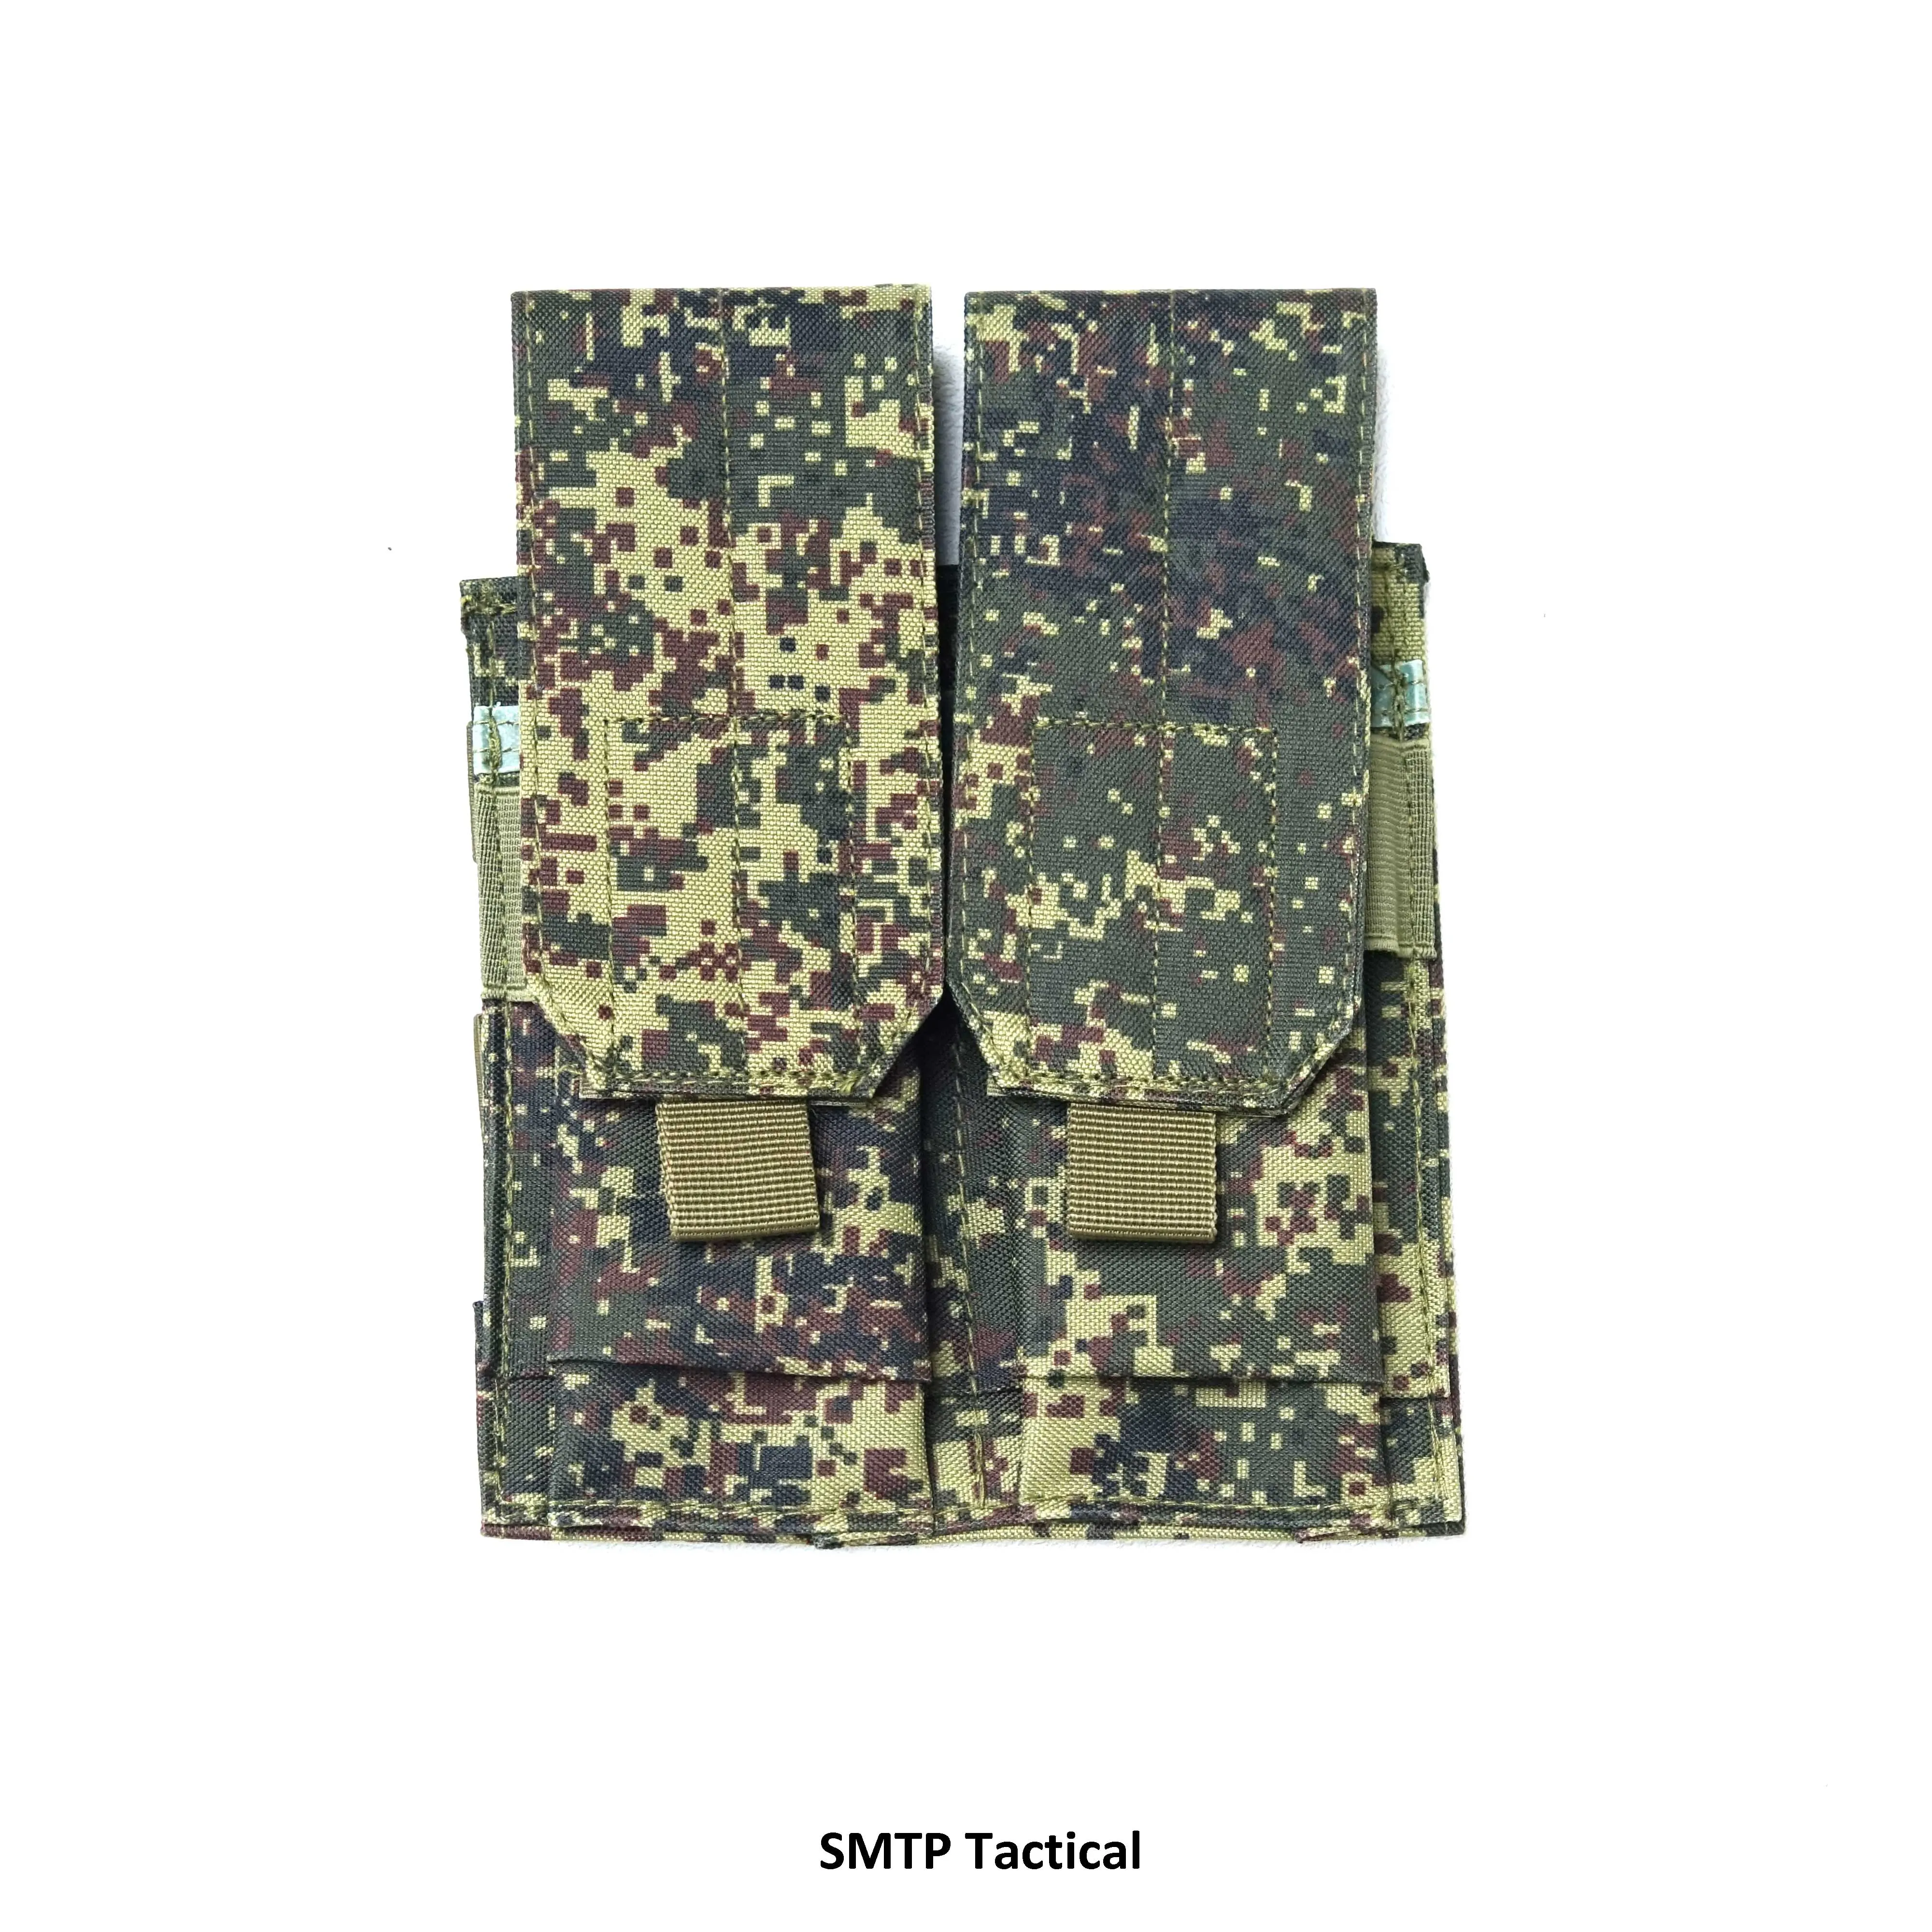 

SMTP WE517 Russian Army emr magazine pouch little green man EMR 1000D durable nylon molle system pistol 2-mag pouch